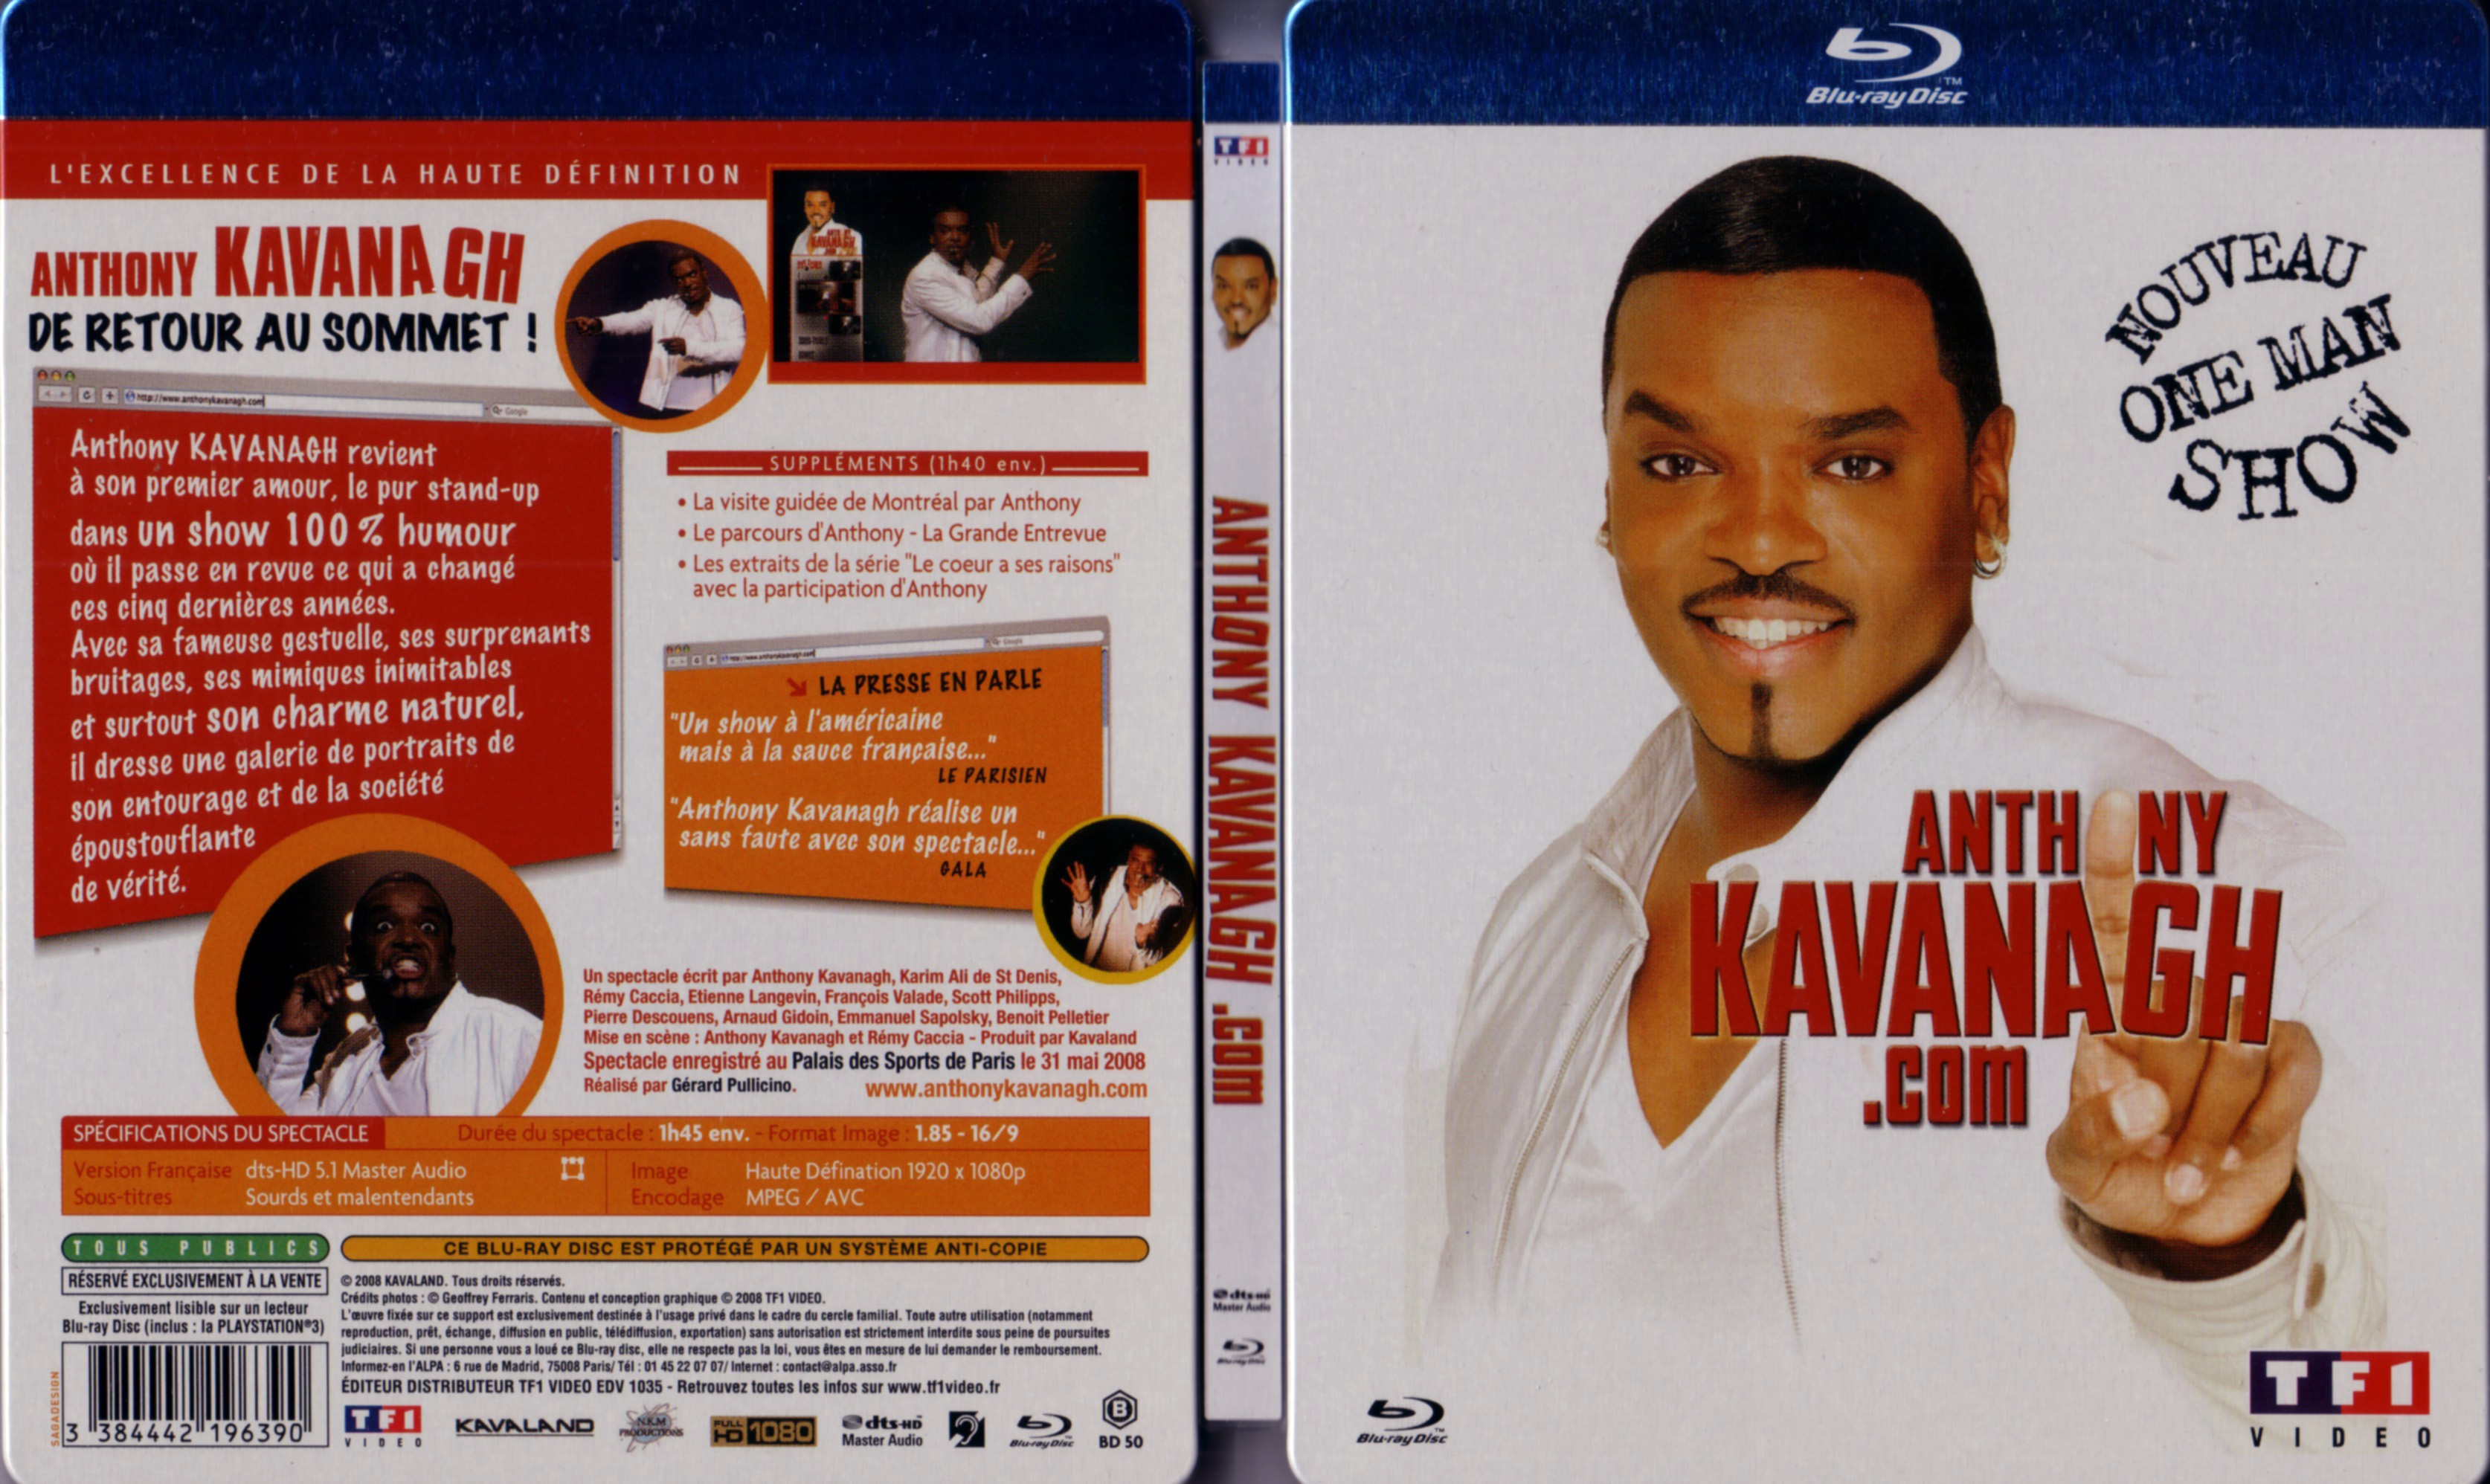 Jaquette DVD Anthony Kavanagh point com (BLU-RAY)